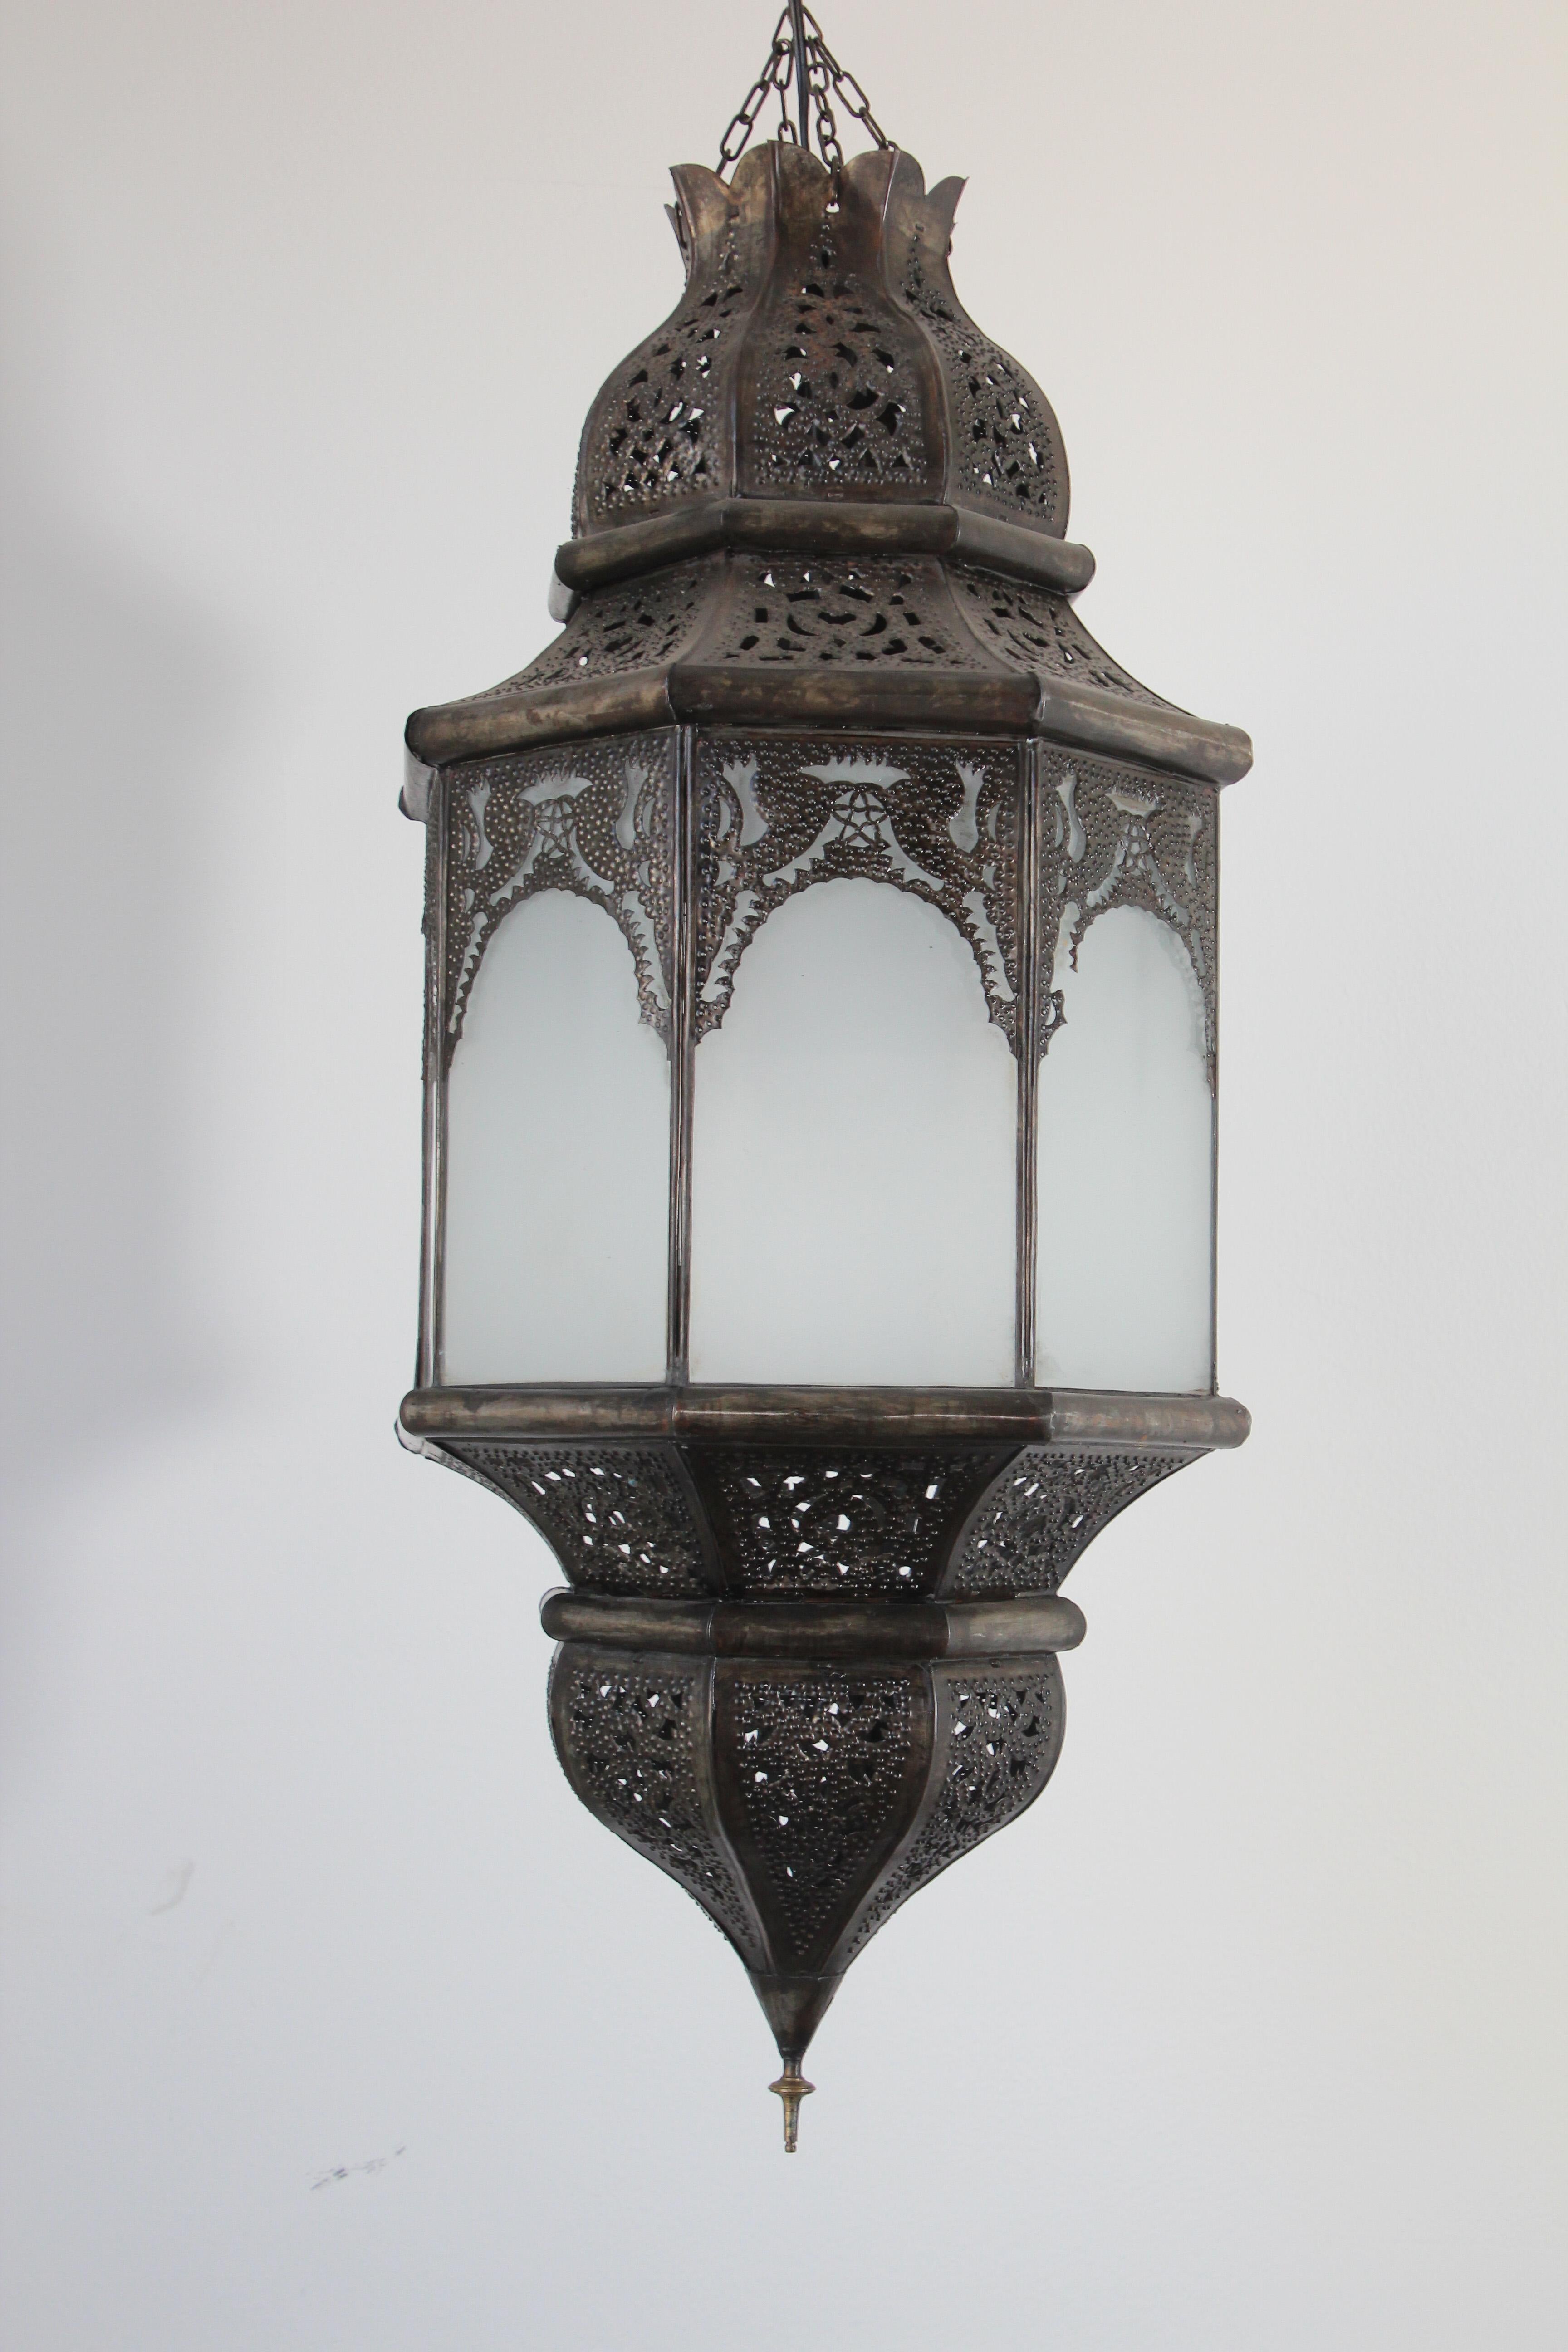 Vintage large Moroccan Moorish hanging glass pendant from Marrakech with sandblasted glass in white milky glass with dark bronze color metal finish.
The Moroccan lantern has been rewired and has a small door on the side to change the light